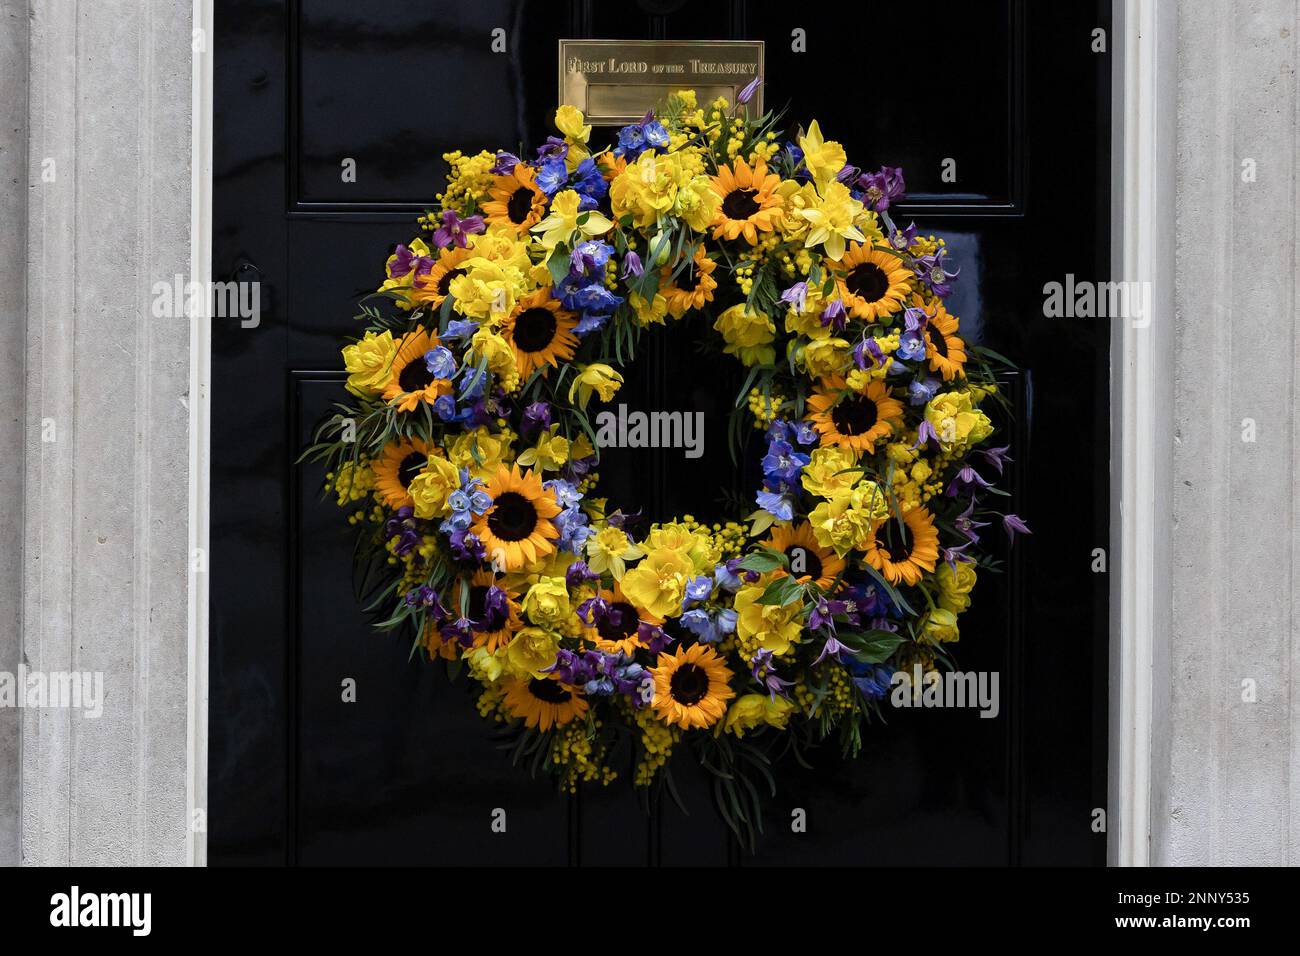 London, UK. 24th Feb, 2023. A wreath decorated with sunflowers, the national flower of Ukraine, hangs on the door of 10 Downing Street in London. The world is marking the one-year anniversary of the full-scale Russian invasion of Ukraine. (Photo by Tejas Sandhu/SOPA Images/Sipa USA) Credit: Sipa USA/Alamy Live News Stock Photo